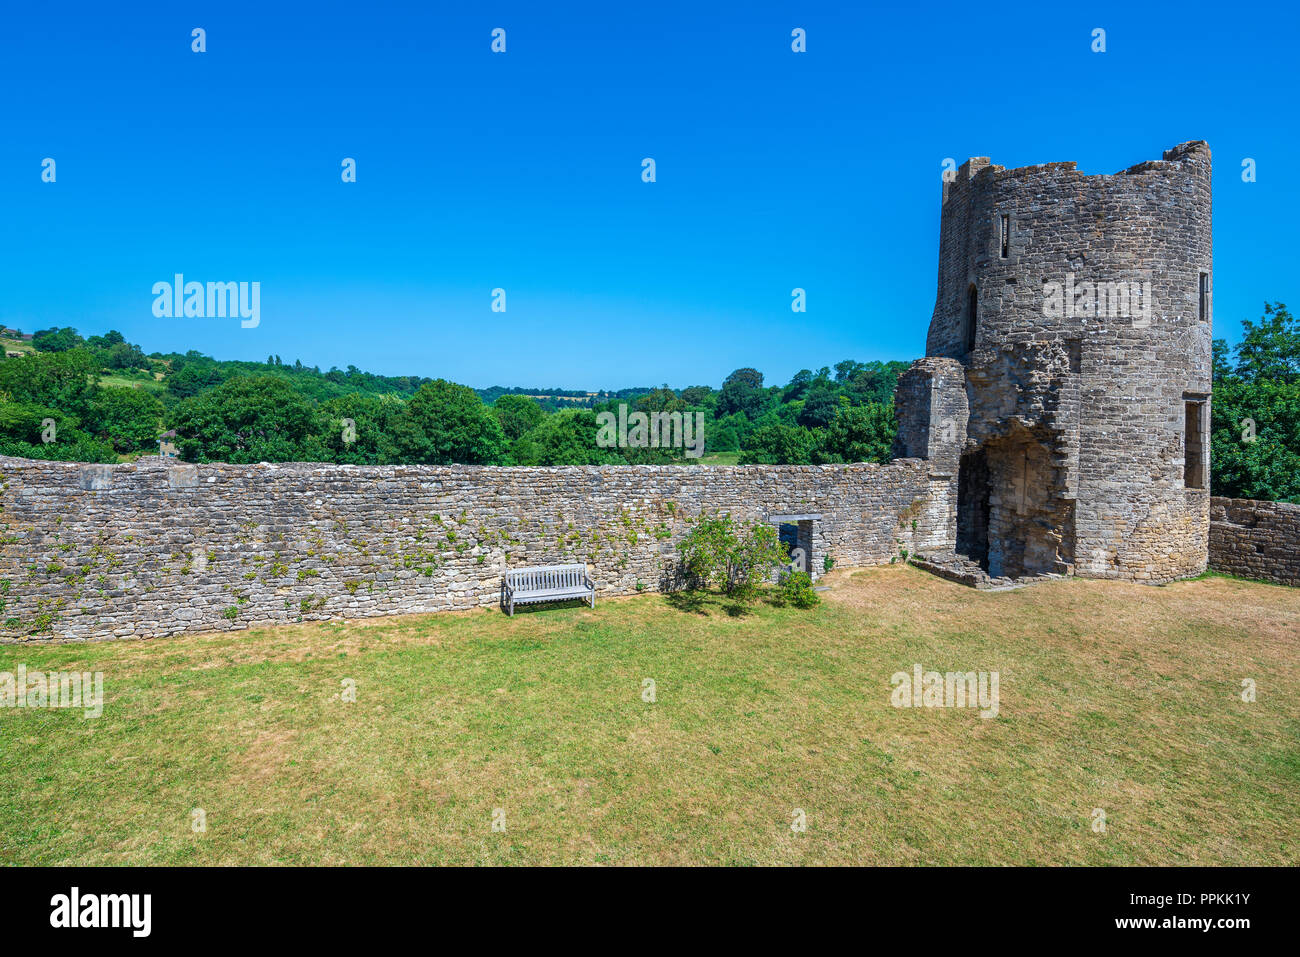 Farleigh Hungerford Castle, Somerset, Angleterre, Royaume-Uni, Europe Banque D'Images